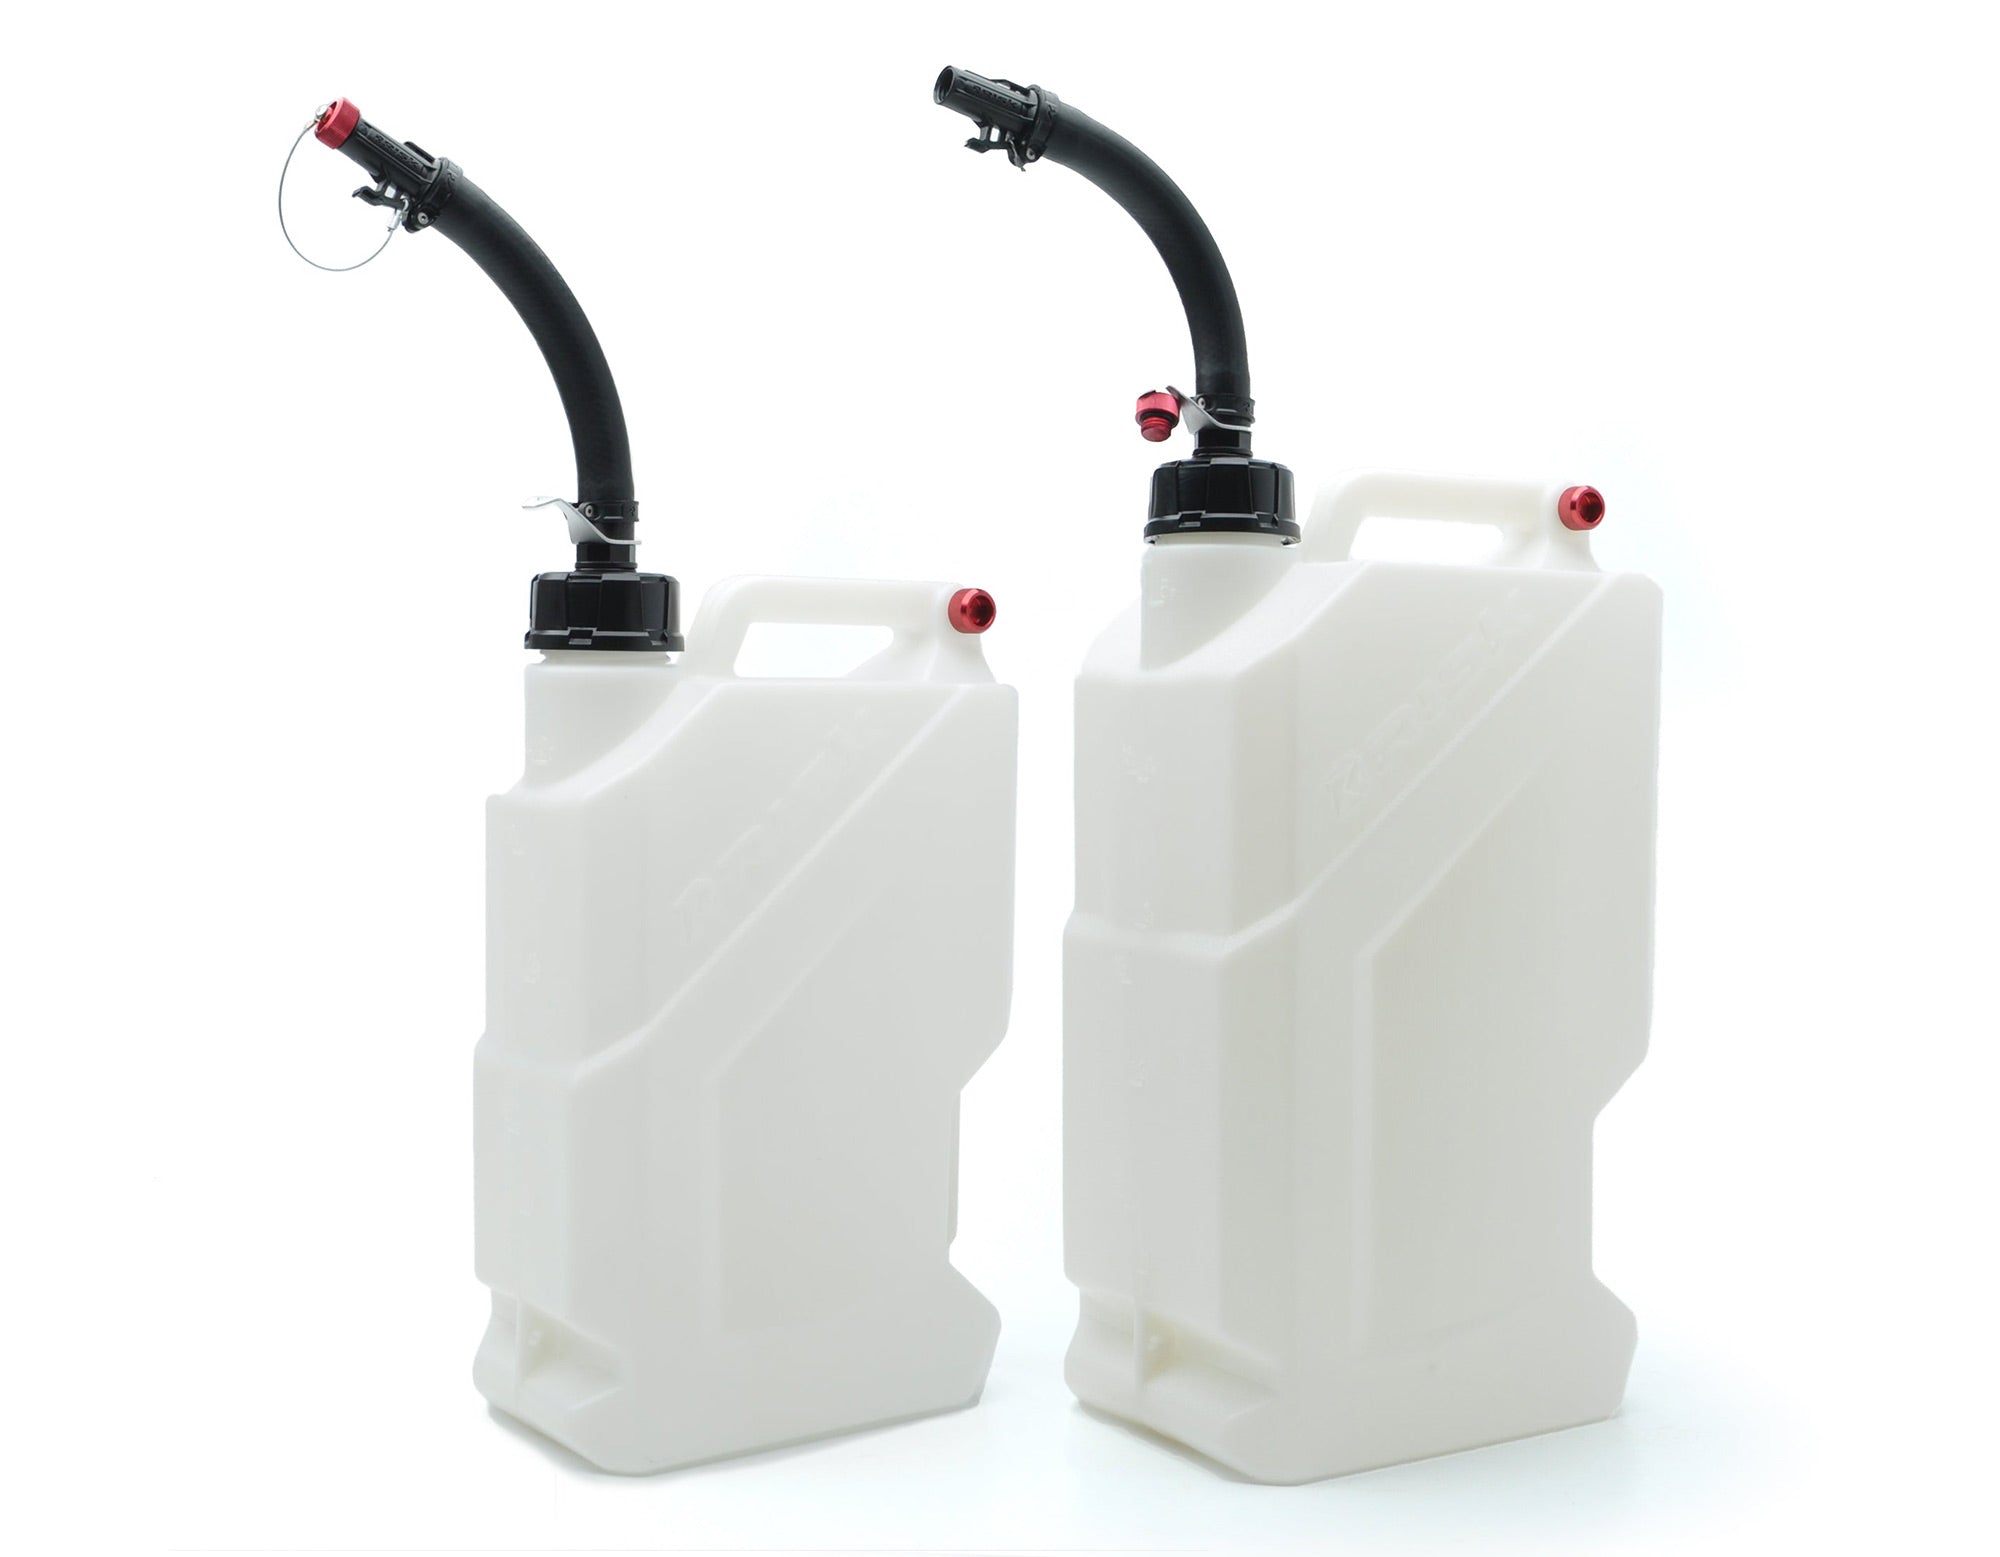 Risk Racing EZ3 3 Gallon and EZ5 5 Gallon Utility Jugs with hose benders both posing in three quarter view against a white studio background